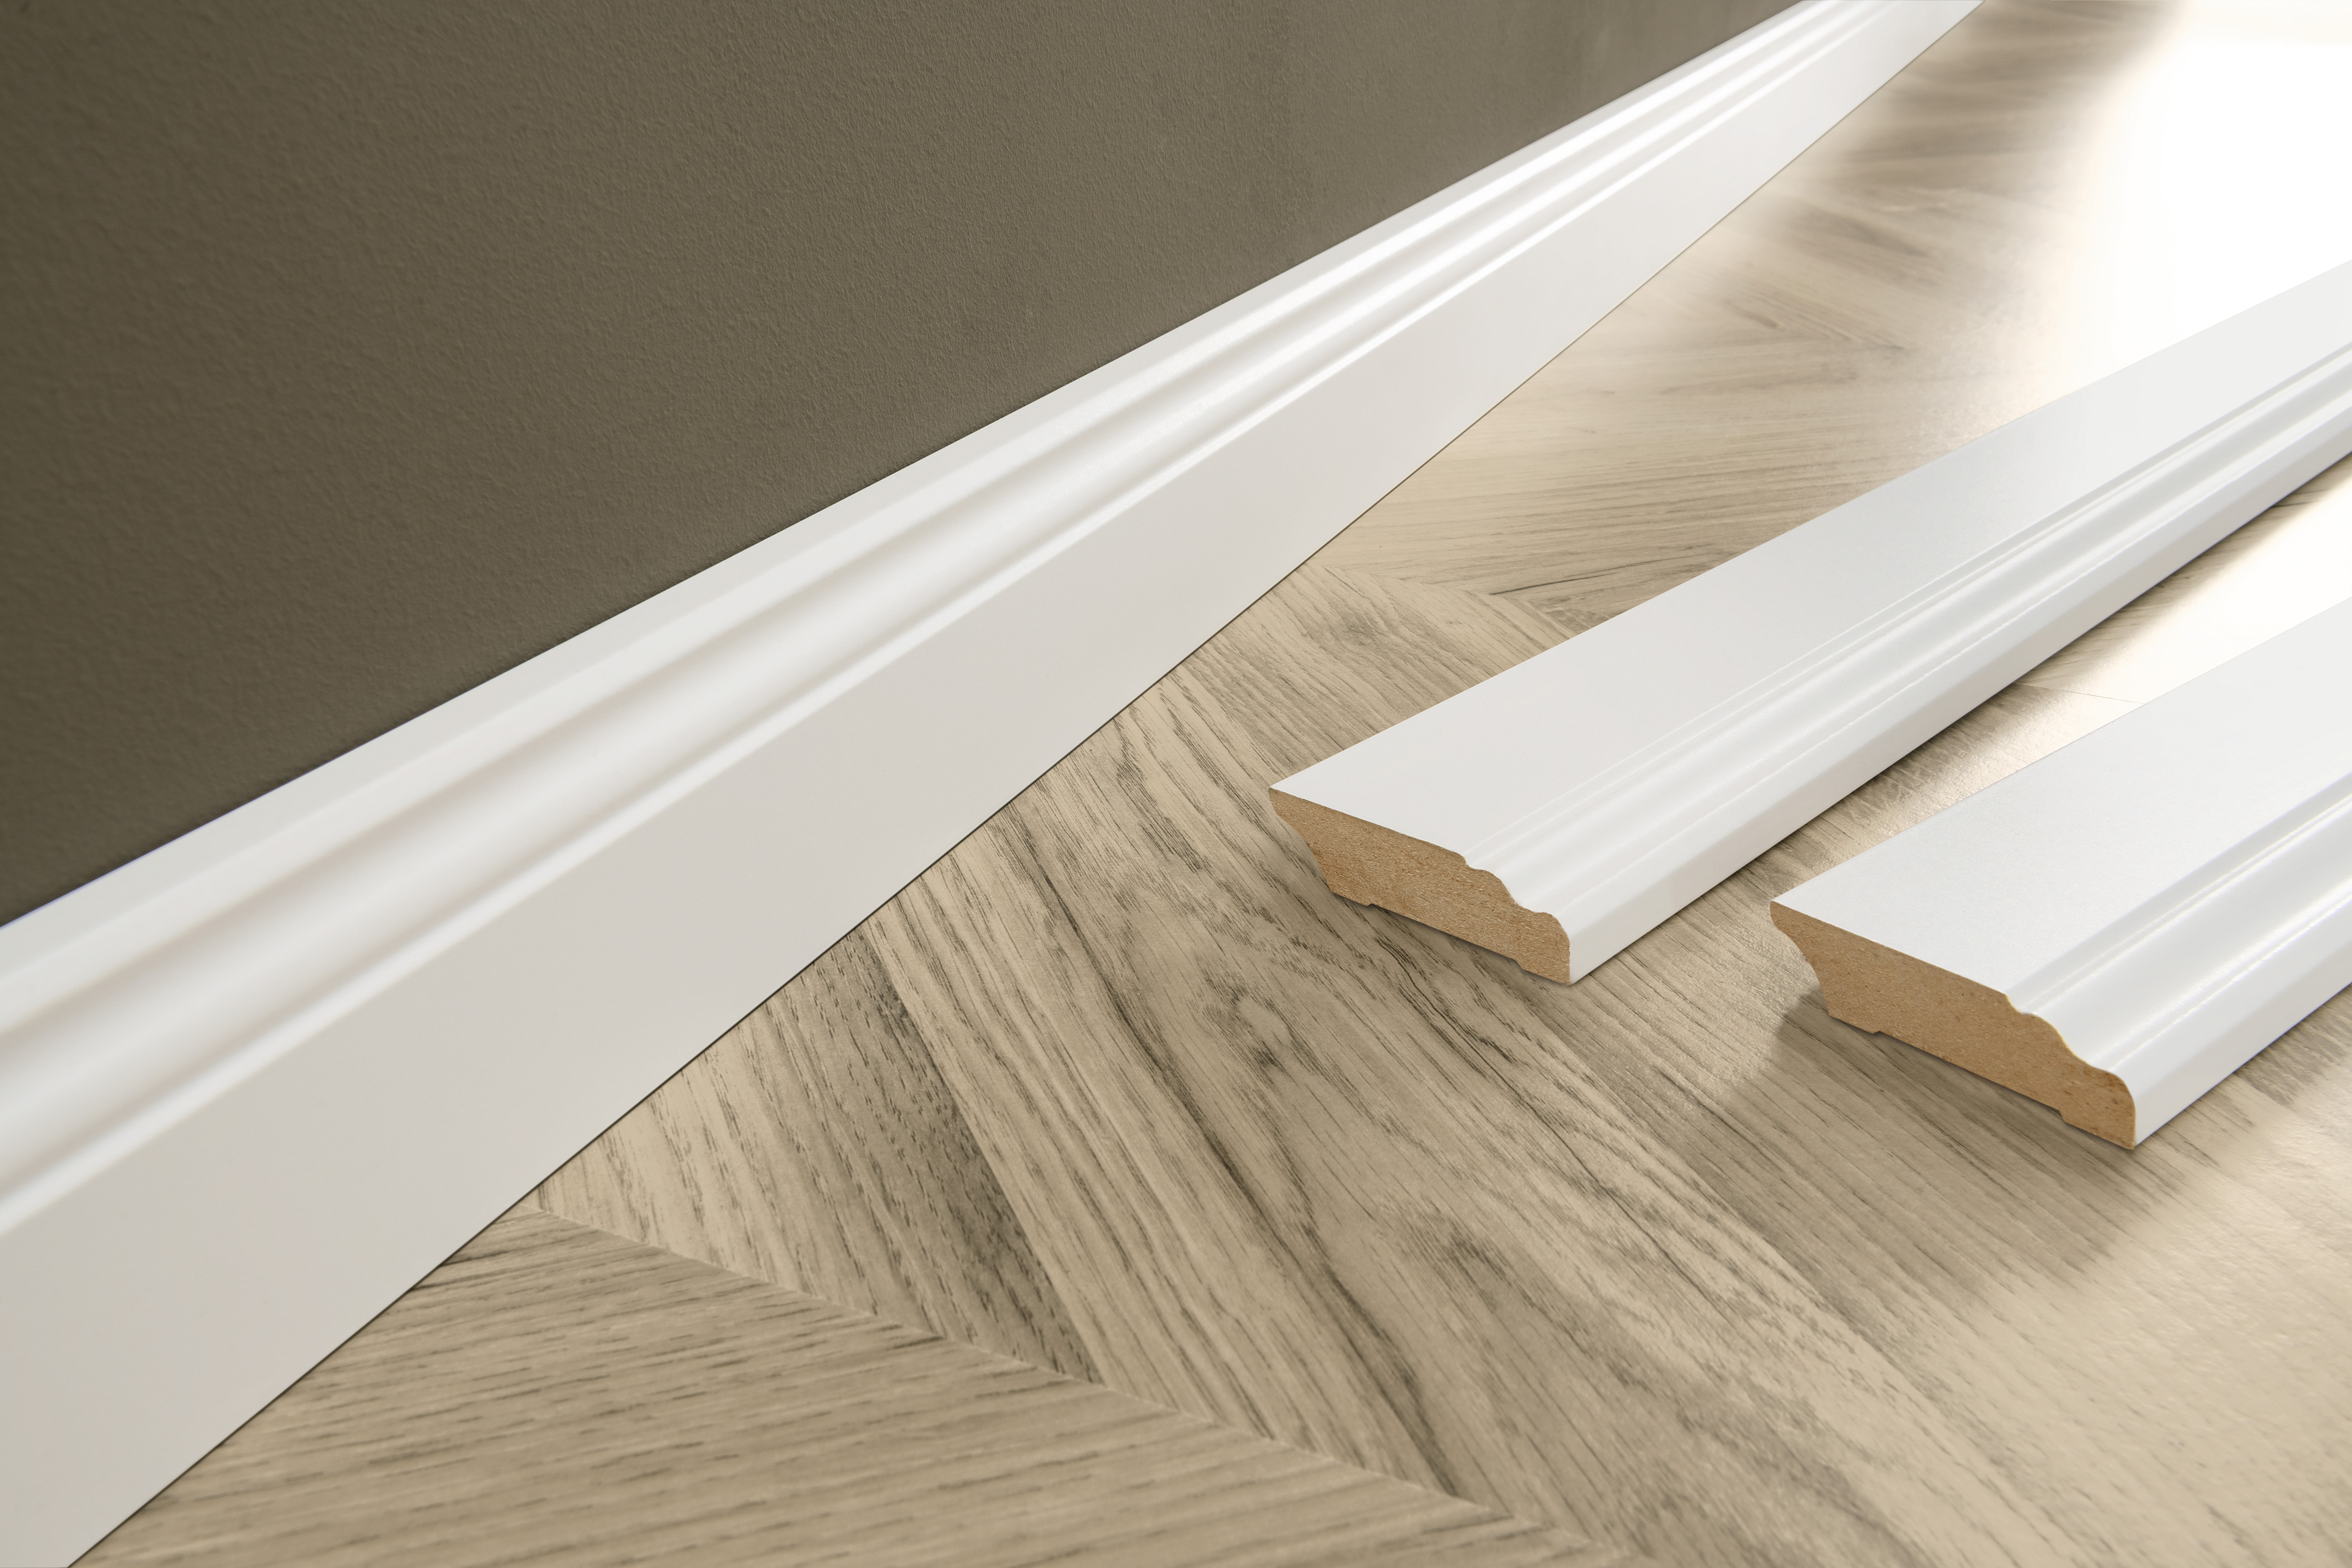 EGGER flooring accessories for successfully installing floors